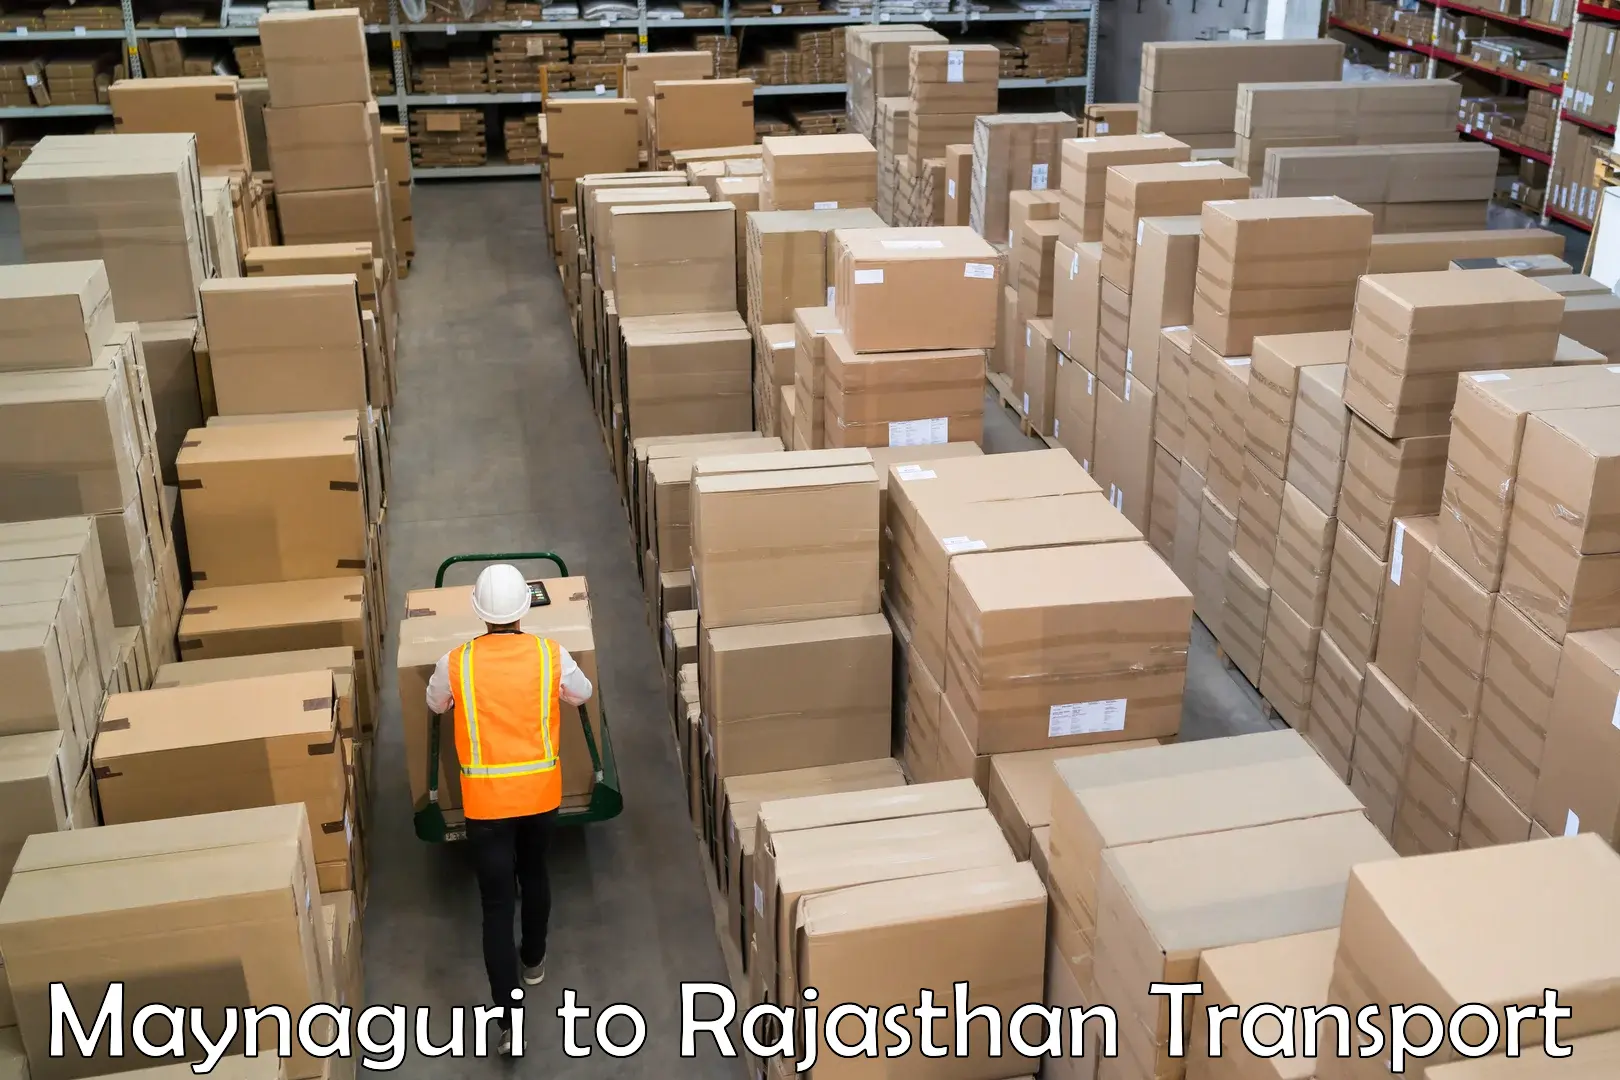 Goods delivery service in Maynaguri to Jaipur